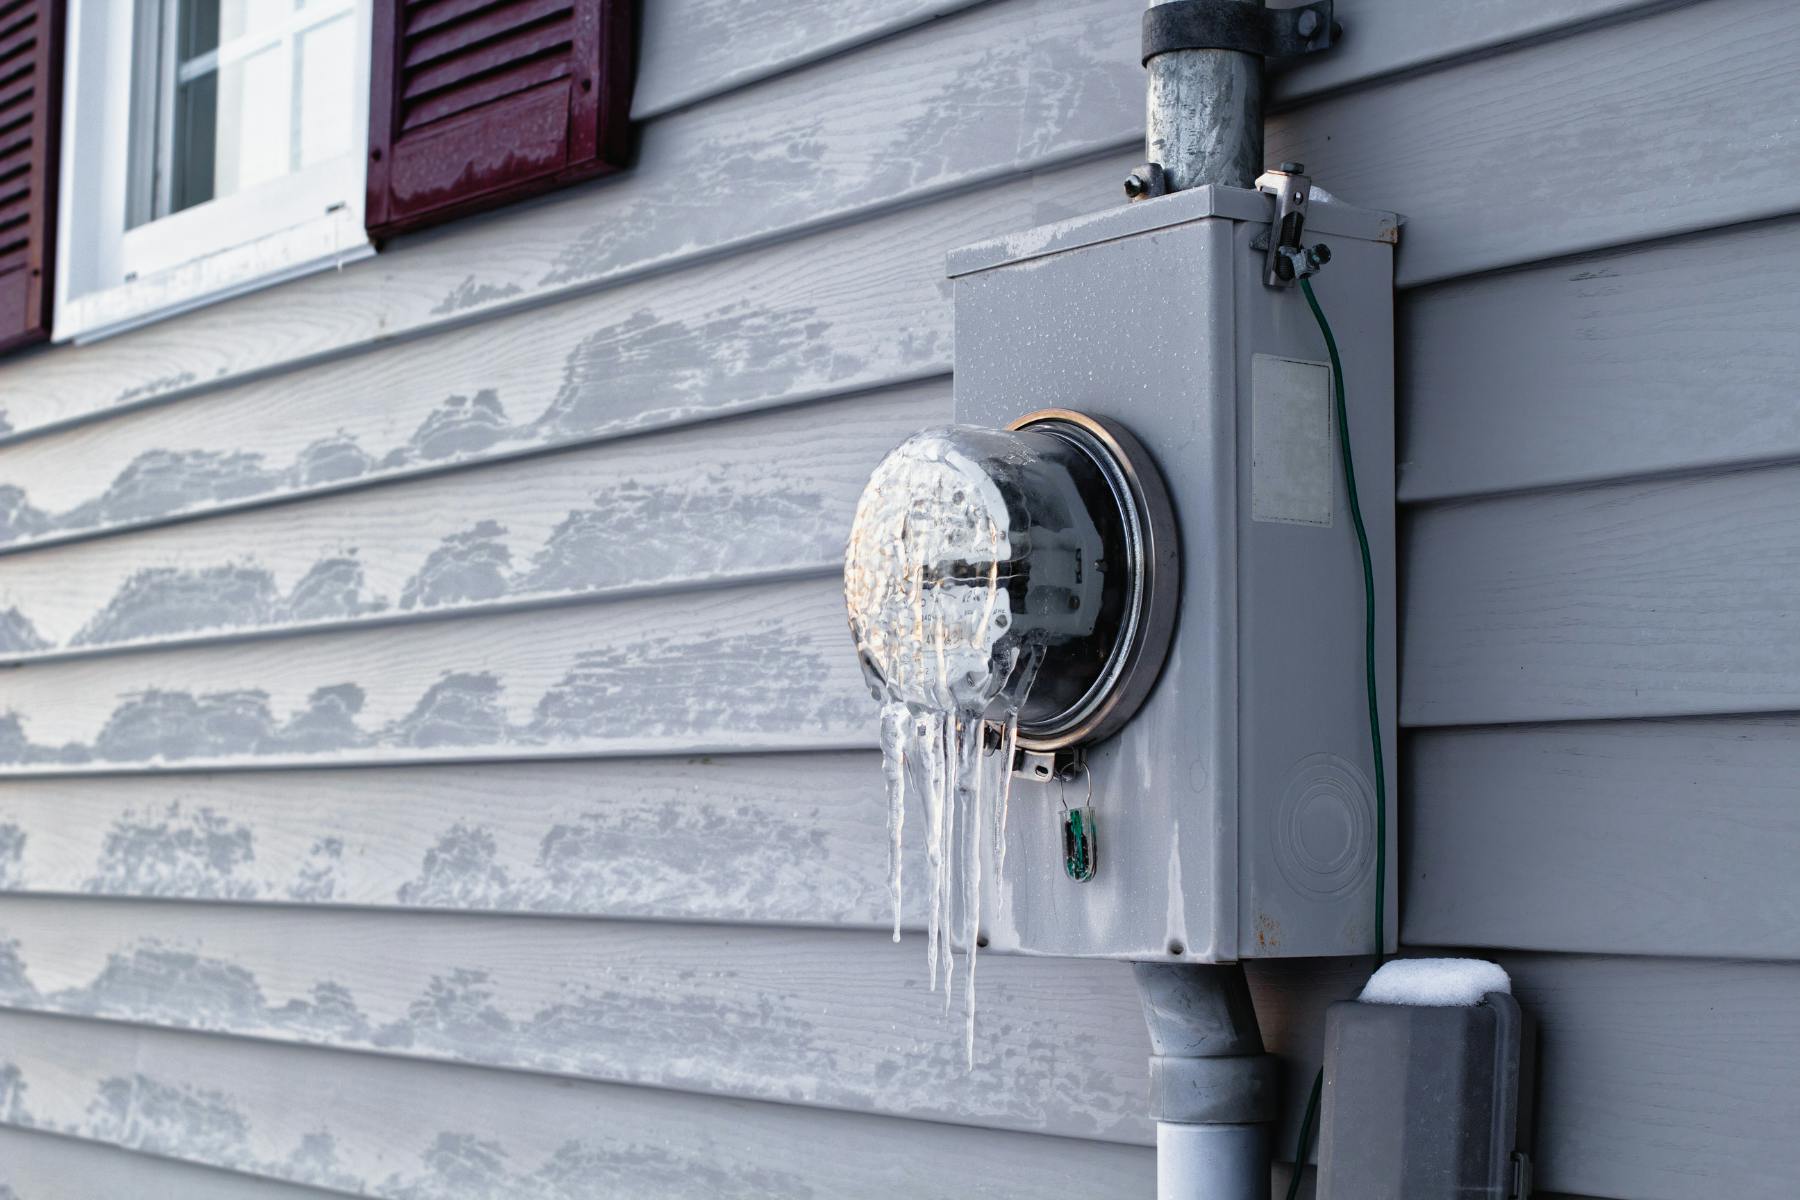 Utility meter on the side of a house with icicles building on it.